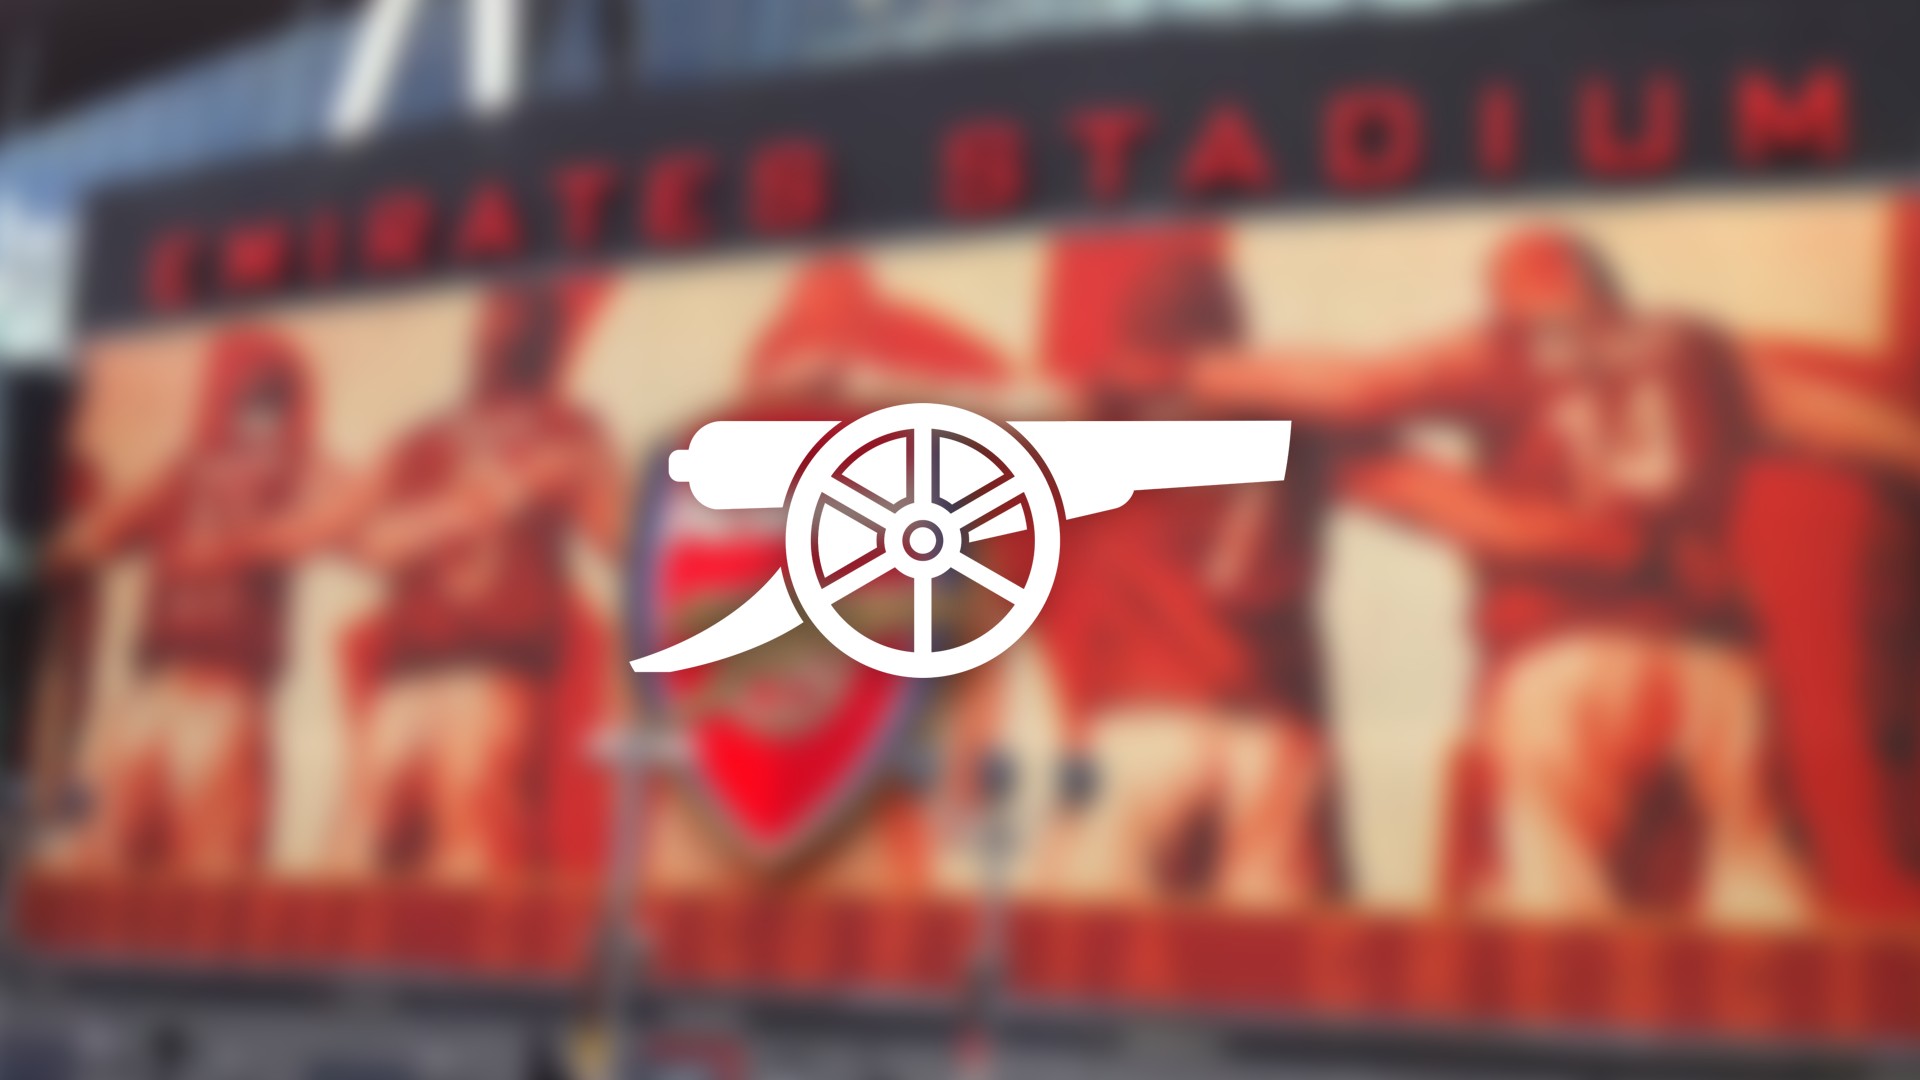 HD Arsenal FC Wallpapers With high-resolution 1920X1080 pixel. You can use this wallpaper for your Desktop Computers, Mac Screensavers, Windows Backgrounds, iPhone Wallpapers, Tablet or Android Lock screen and another Mobile device